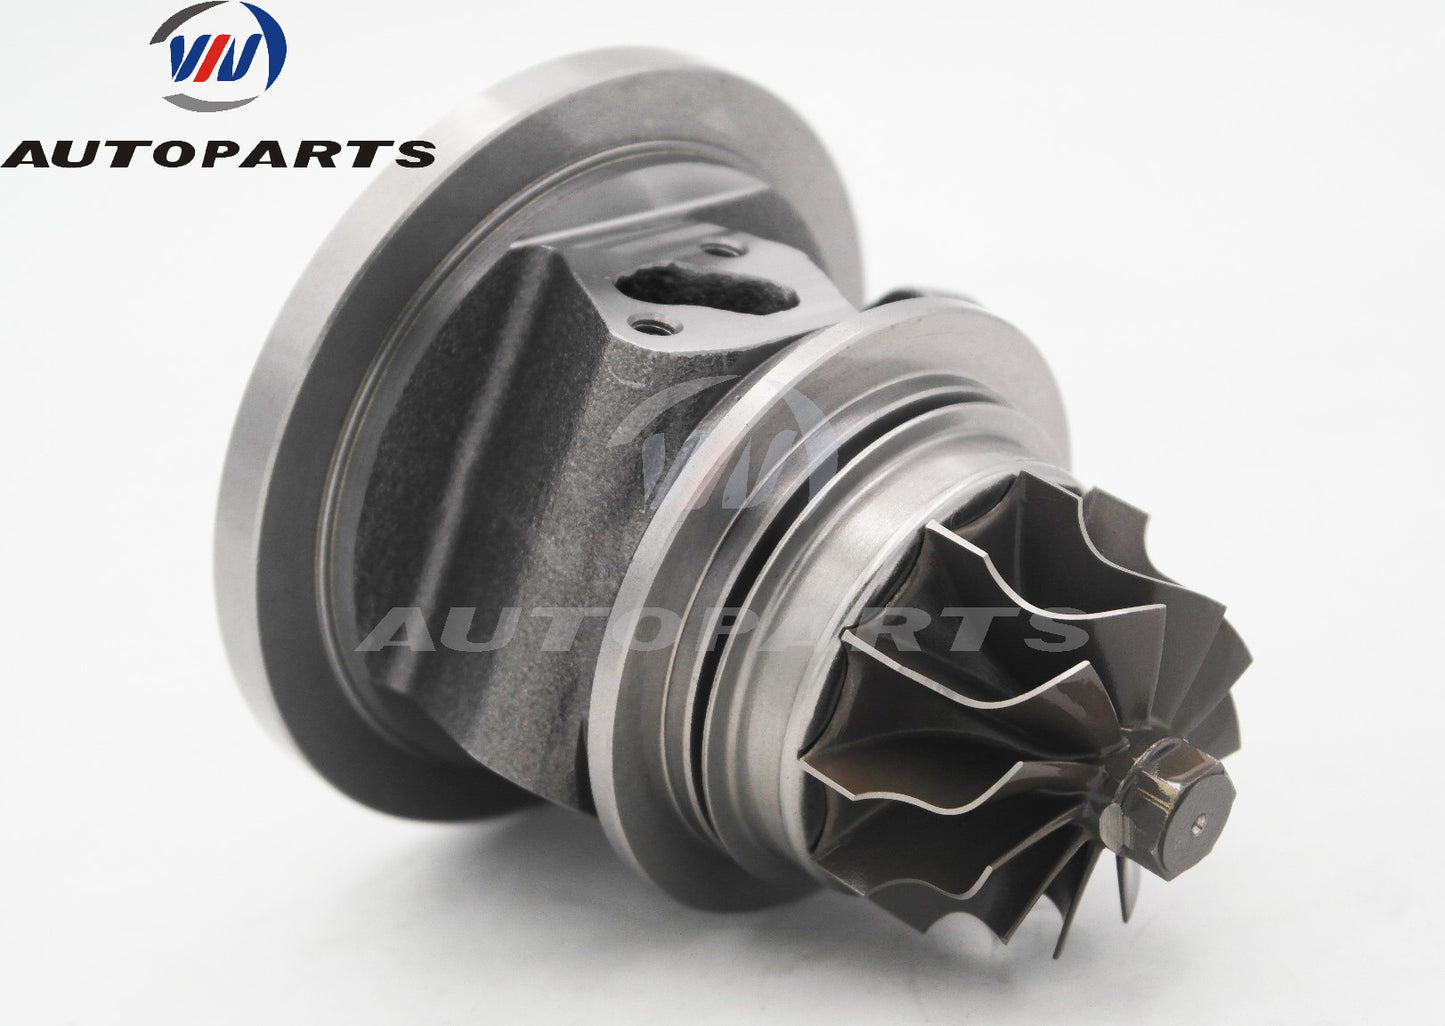 CT20 Cartridge 17202-54030 Core CHRA for Landcrusier CT20 17201-54030 TD 2L-T 86HP Turbo